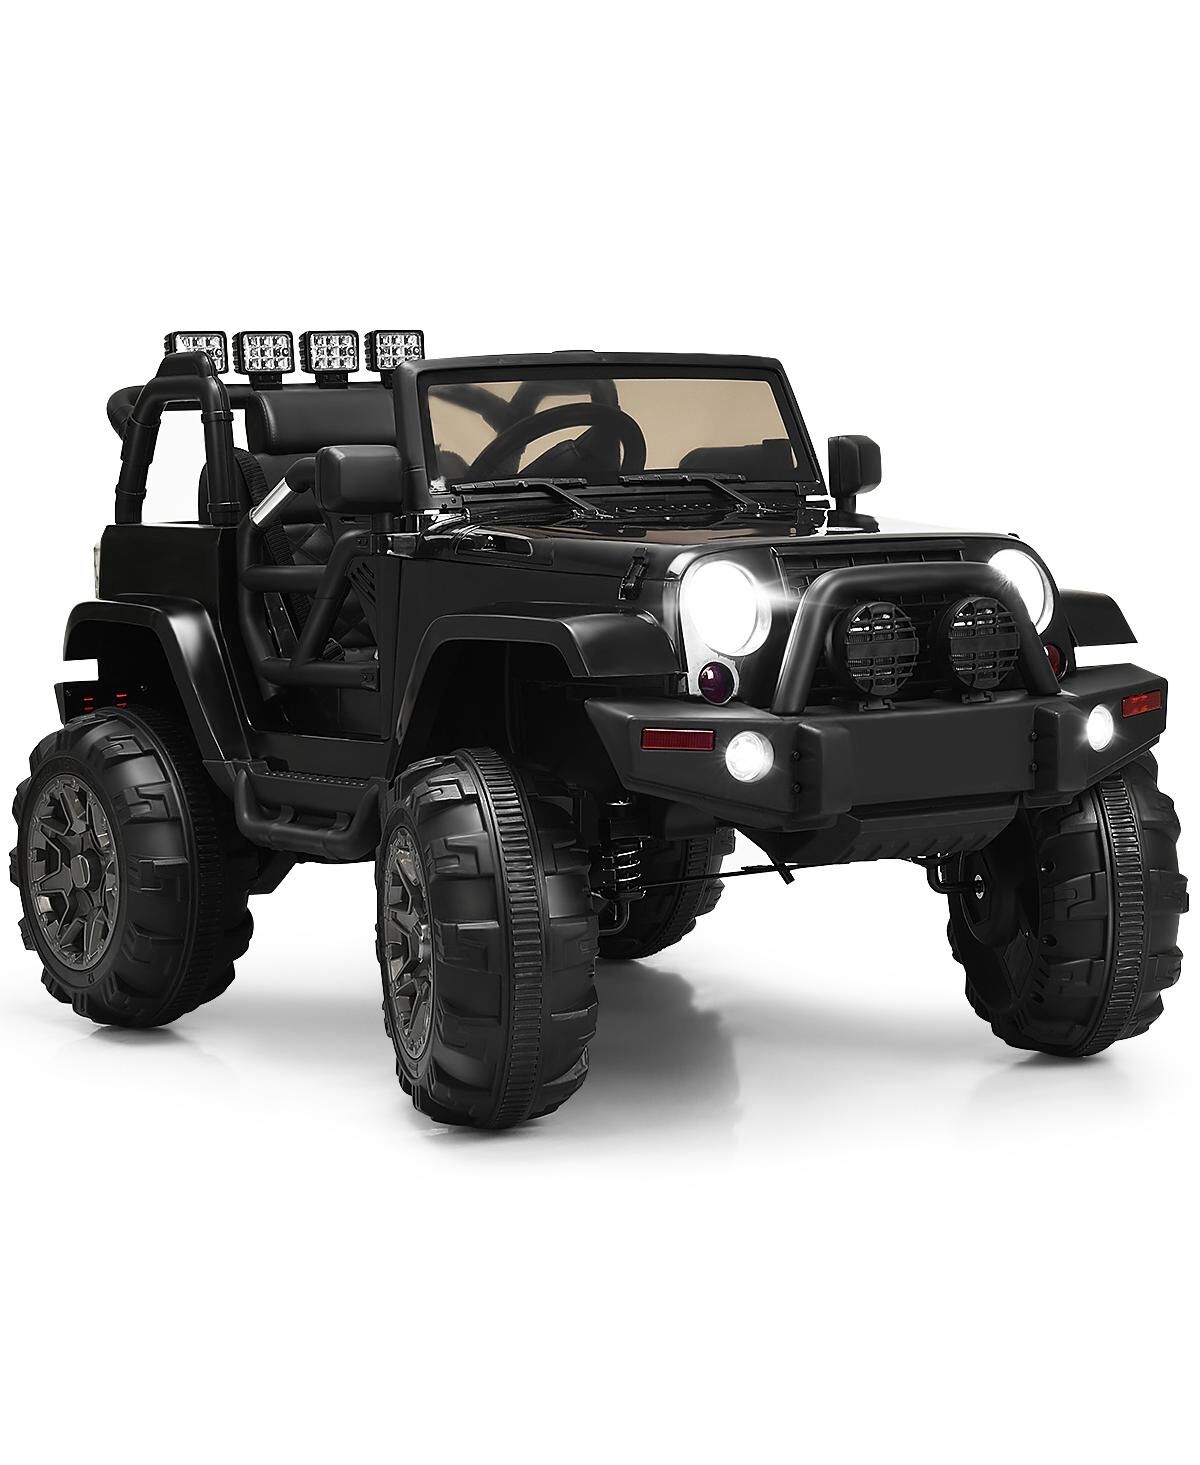 Sugift 12V Electric Ride On Truck with Parental Remote Control and Led Lights - Black